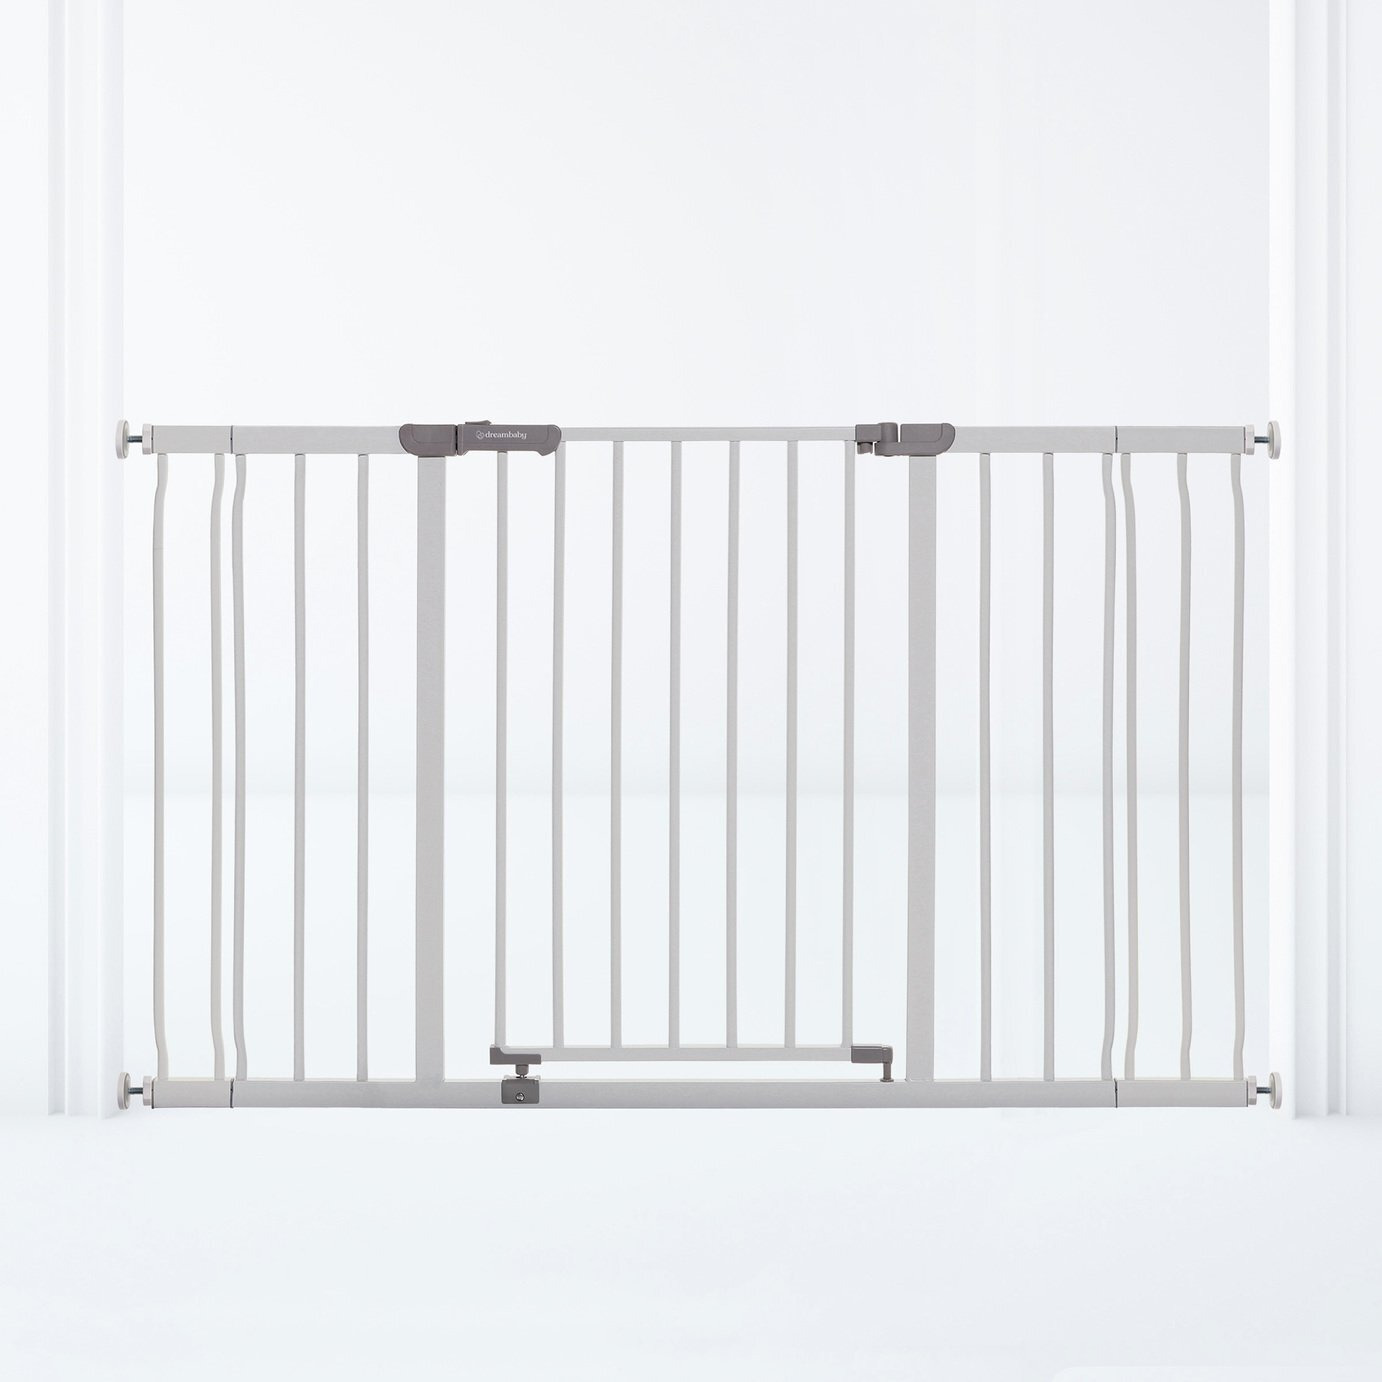 Dreambaby Ava X-Wide Safety Gate Fits 99-132.5cm White - image 1